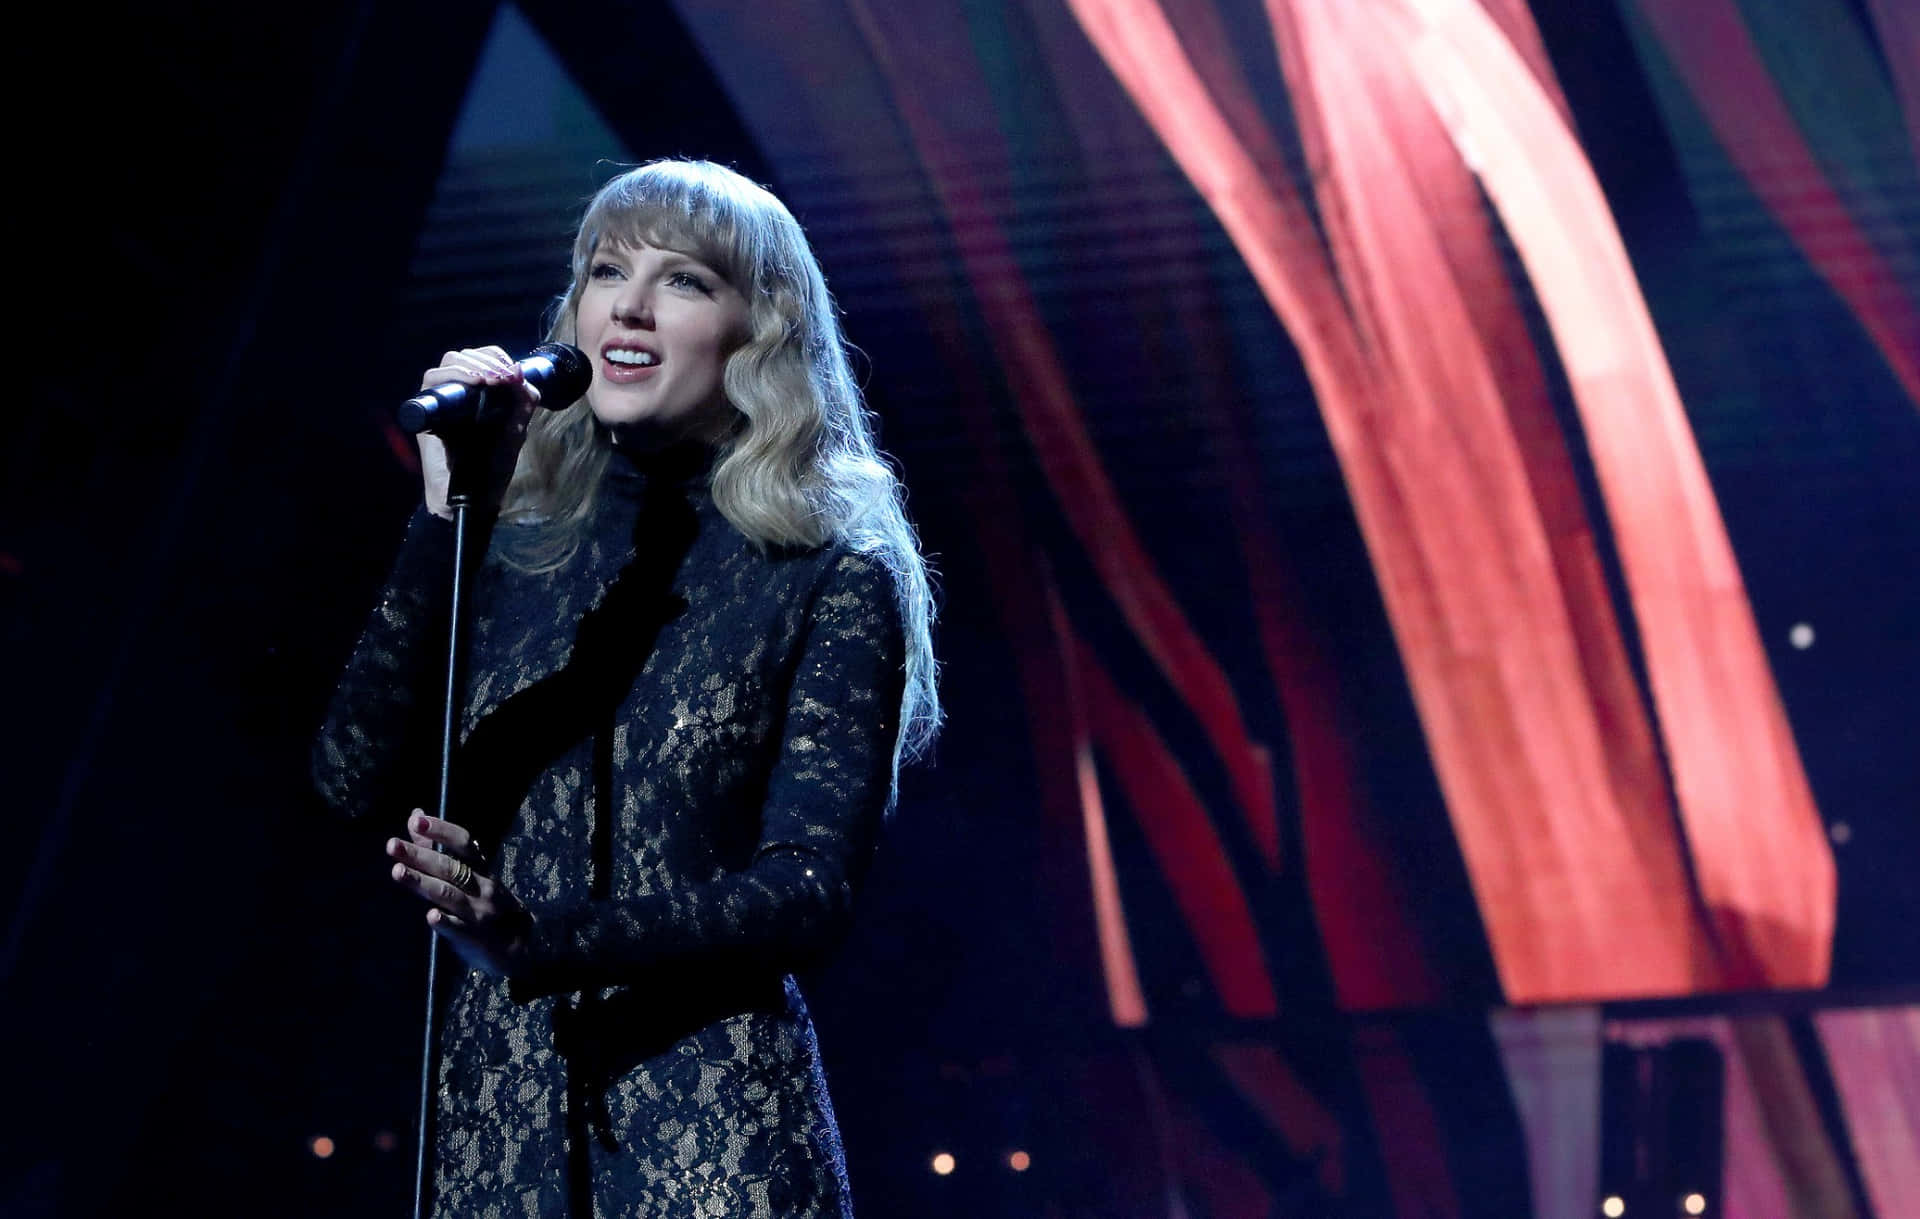 Taylorswift 2021 Rock And Roll Hall Of Fame Performance Baggrund.